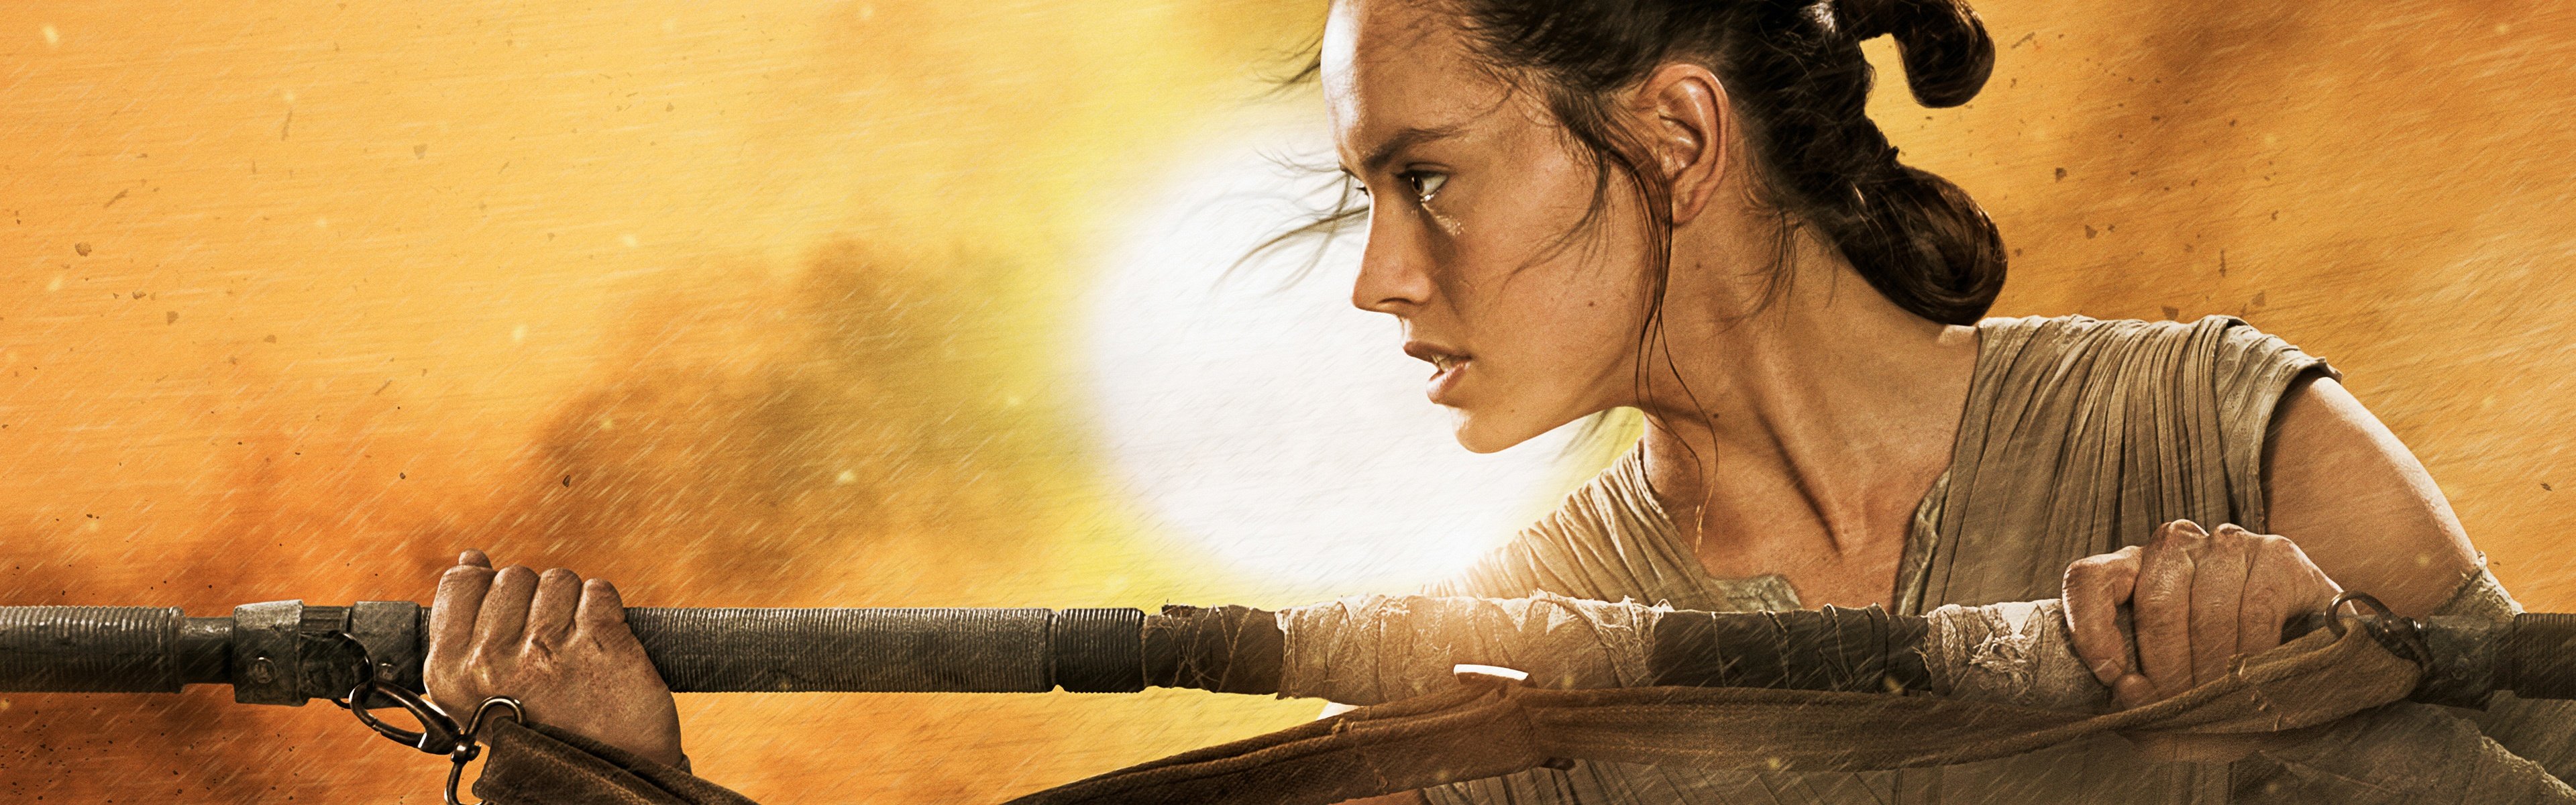 Star Wars The Force Awakens Rey Wallpapers HD Wallpapers 3840x1200